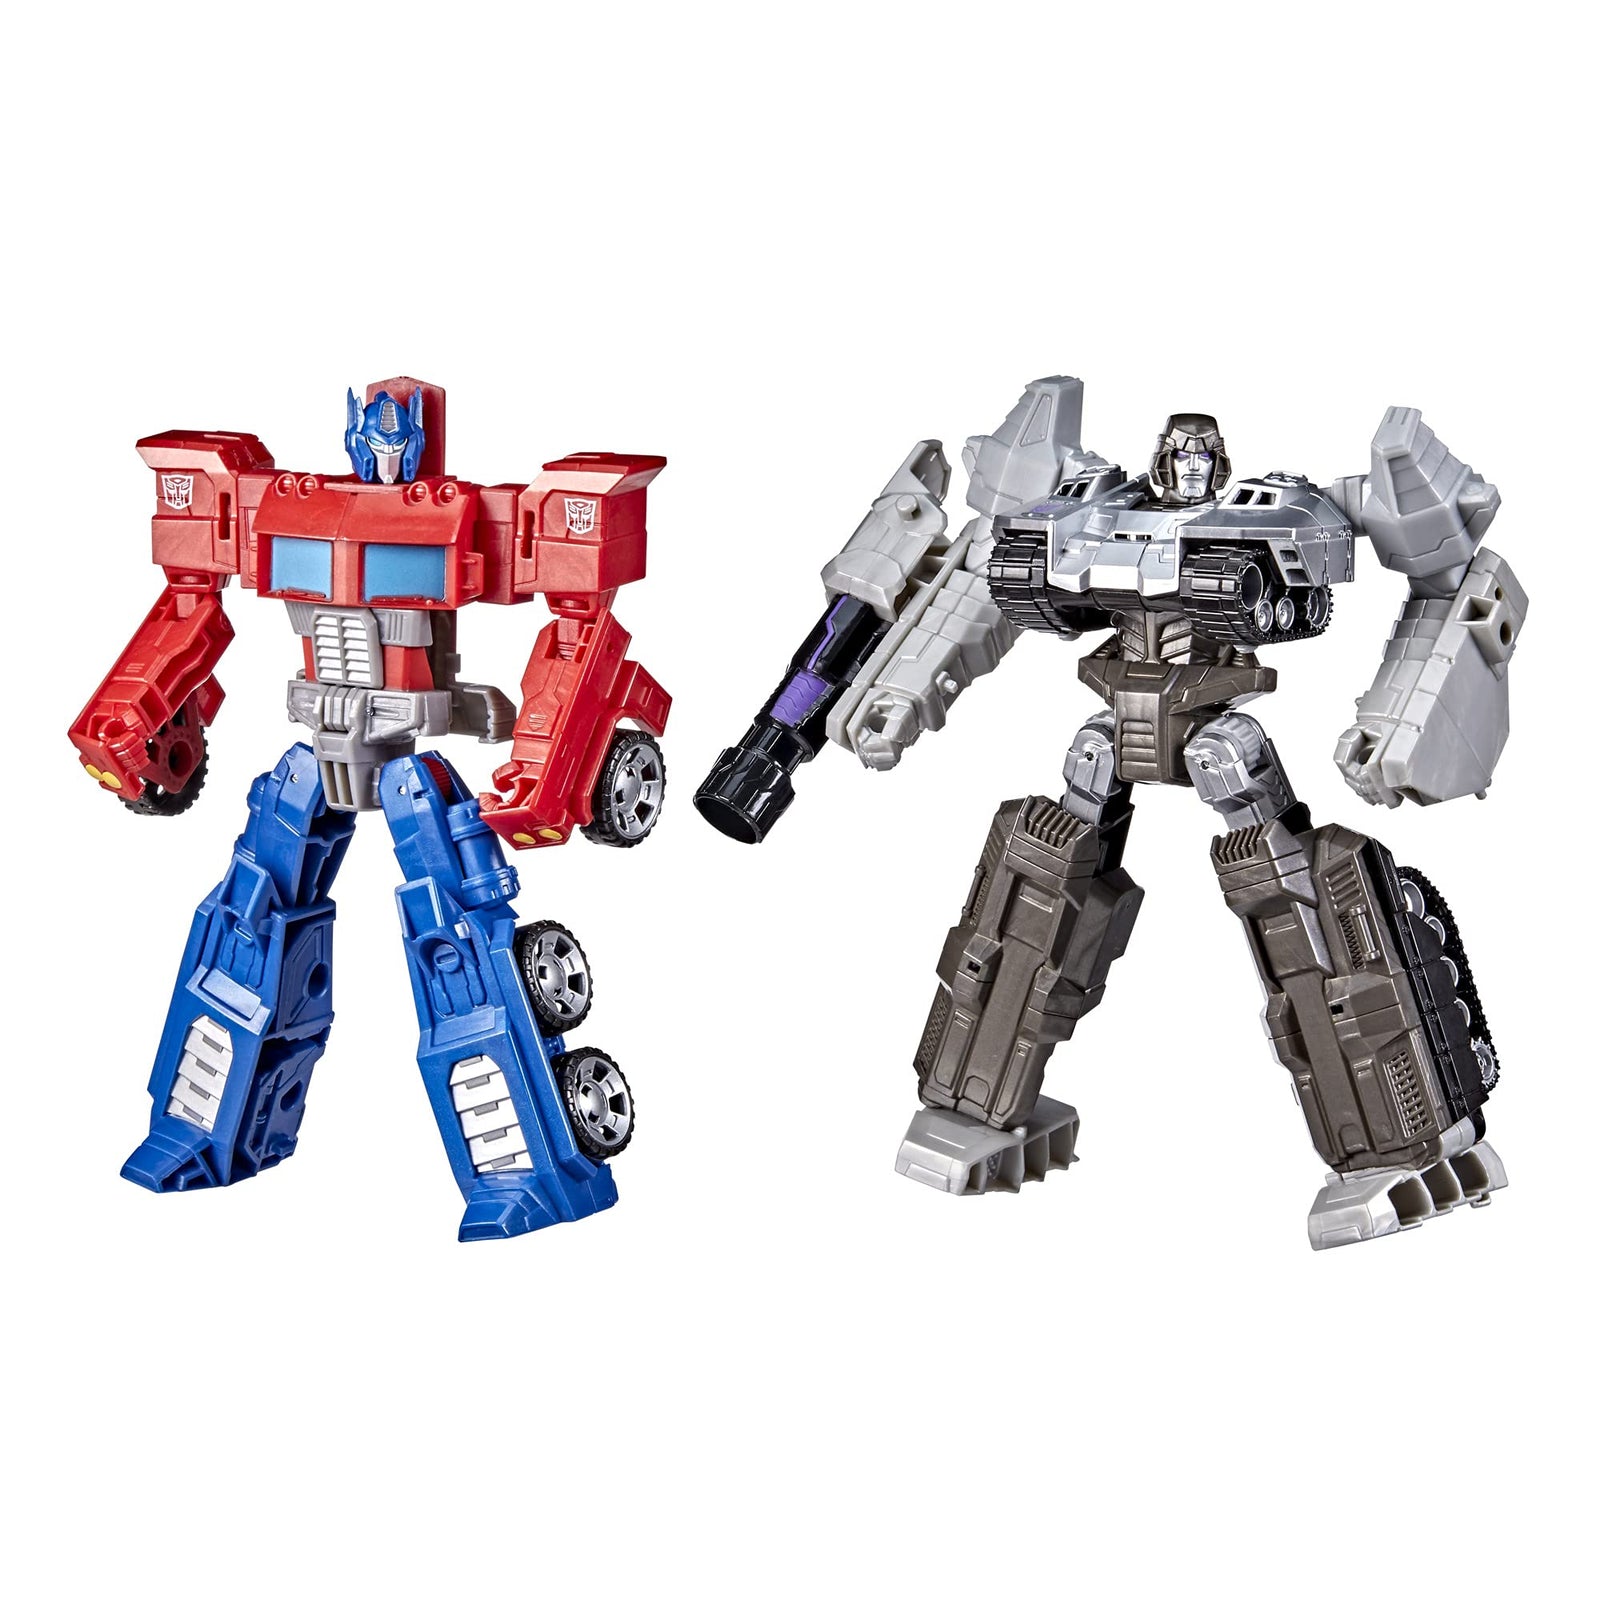 Transformers Toys Heroes and Villains Optimus Prime and Megatron 2-Pack Action Figures - for Kids Ages 6 and Up, 7-inch